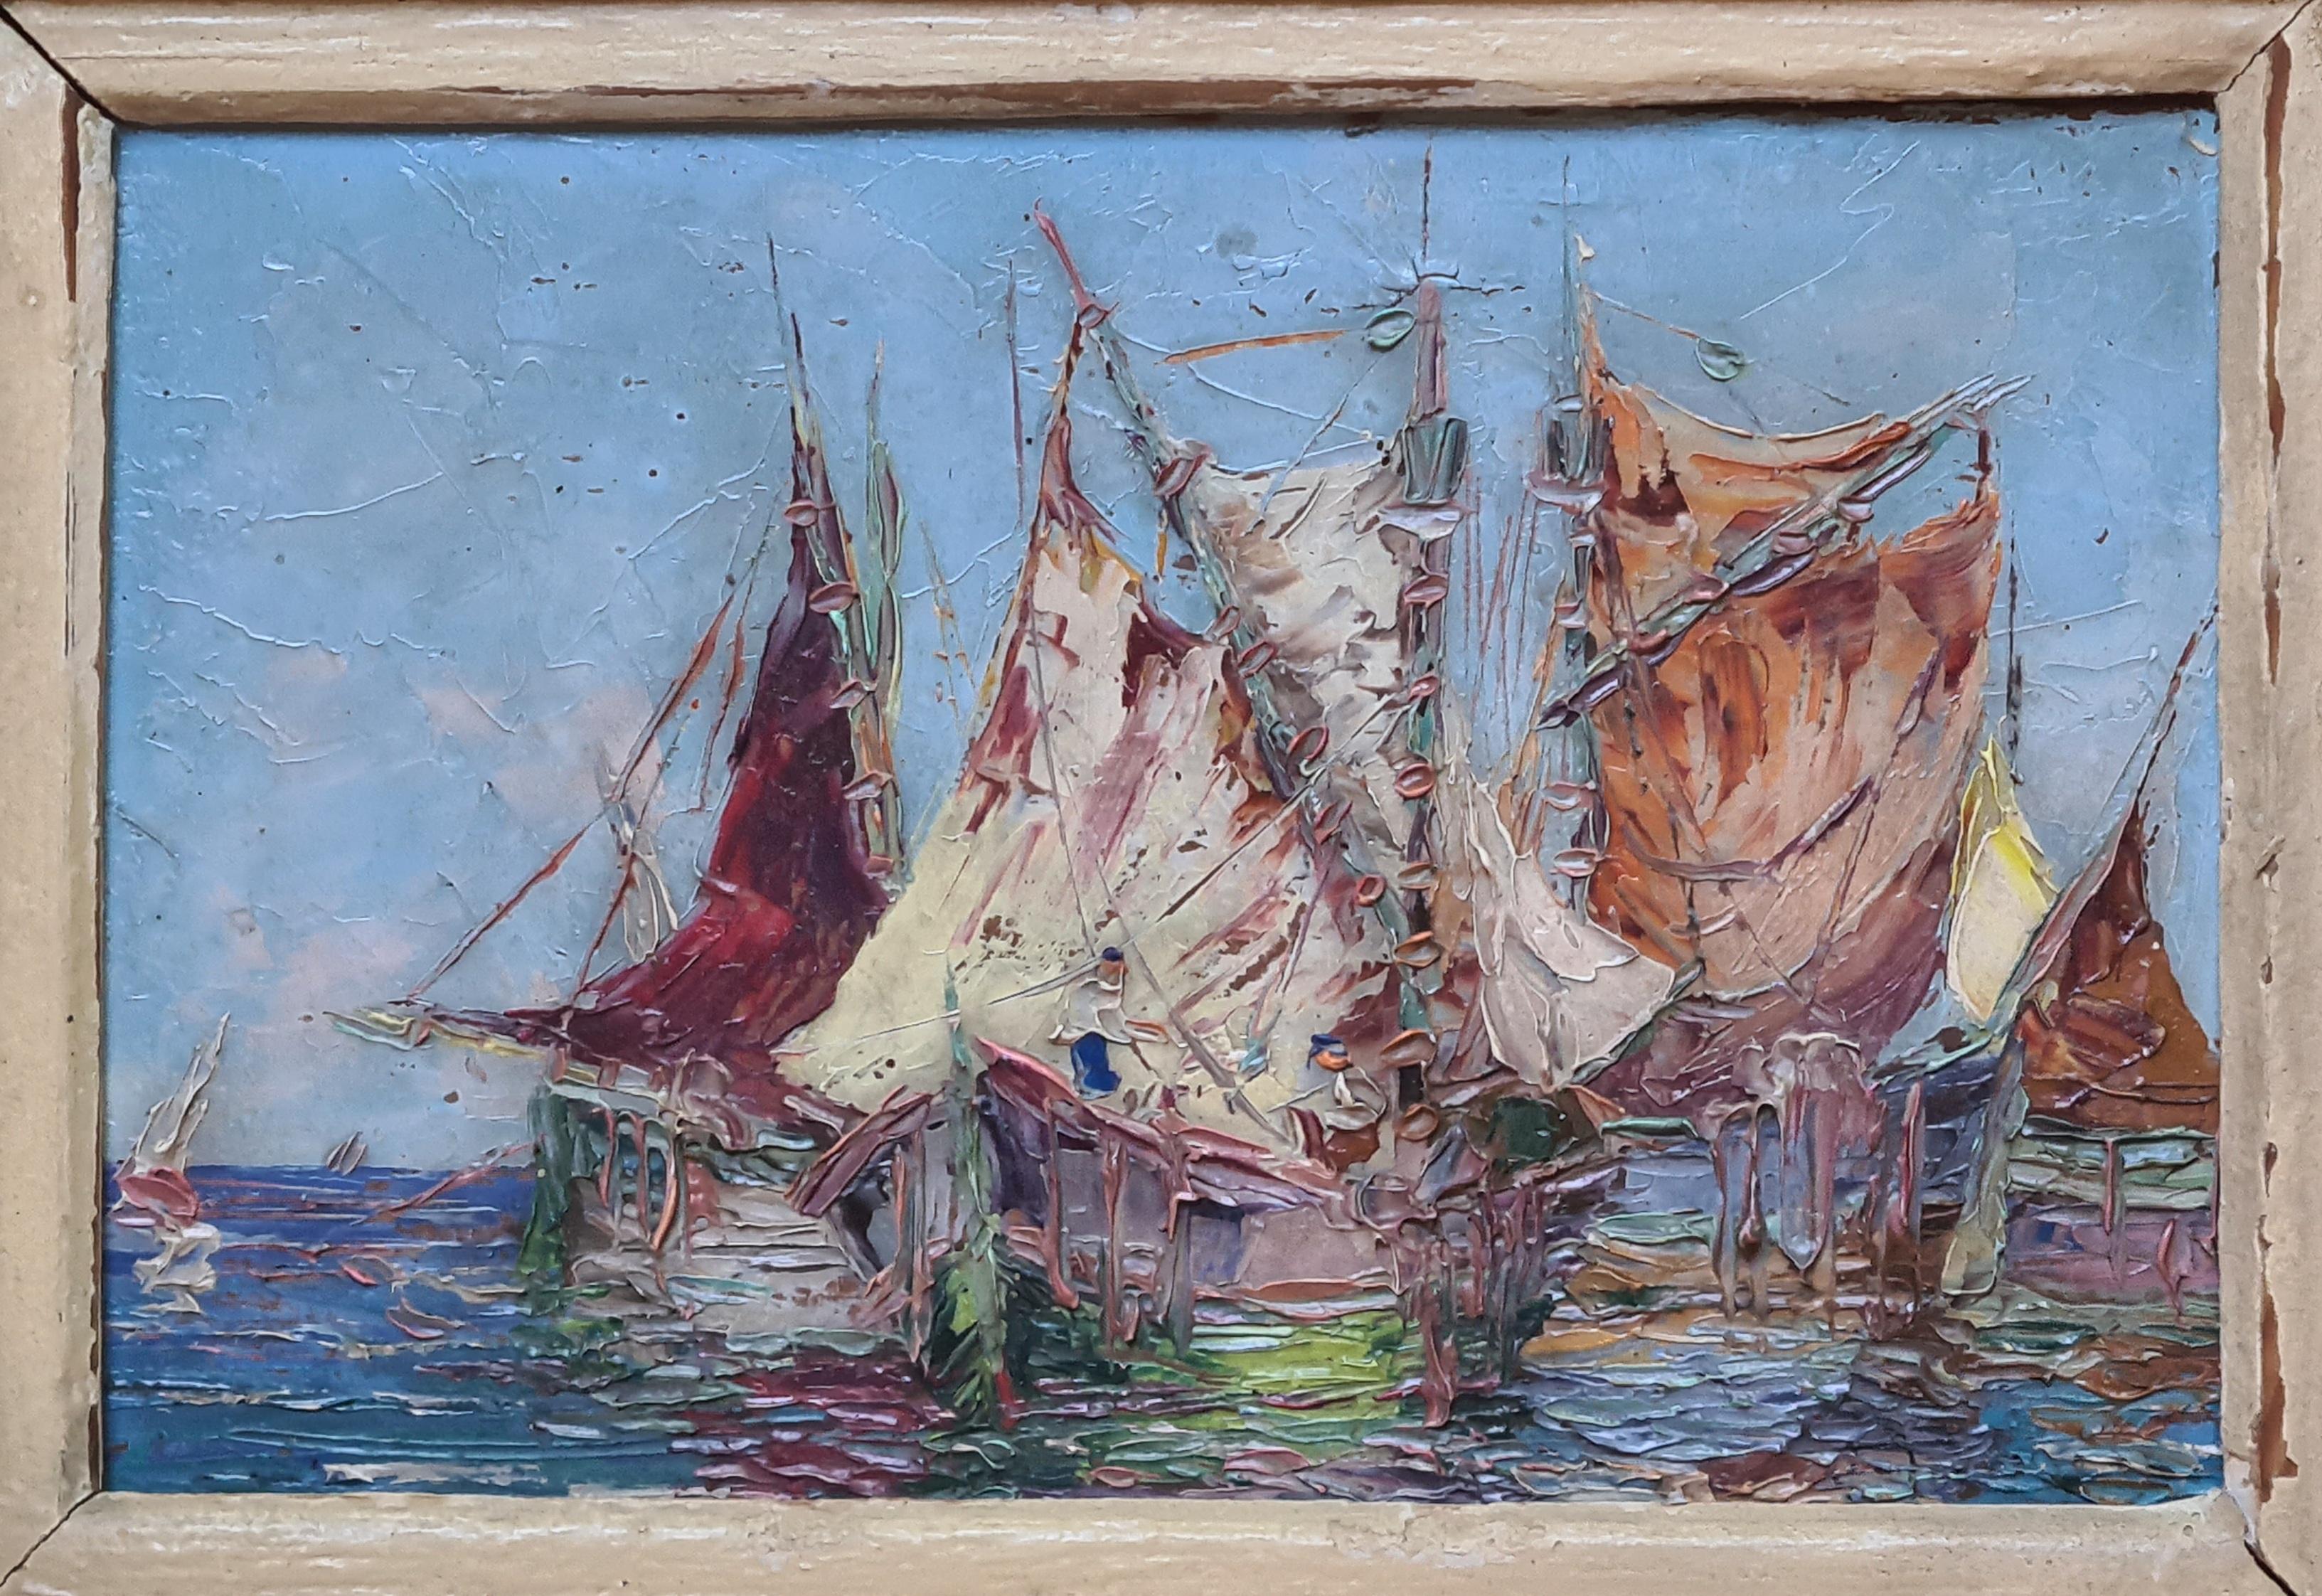 Henri Edouard Bargin Figurative Painting - Les Voiliers de Pêche, The Fishing Boats. French Impressionist oil on Board.